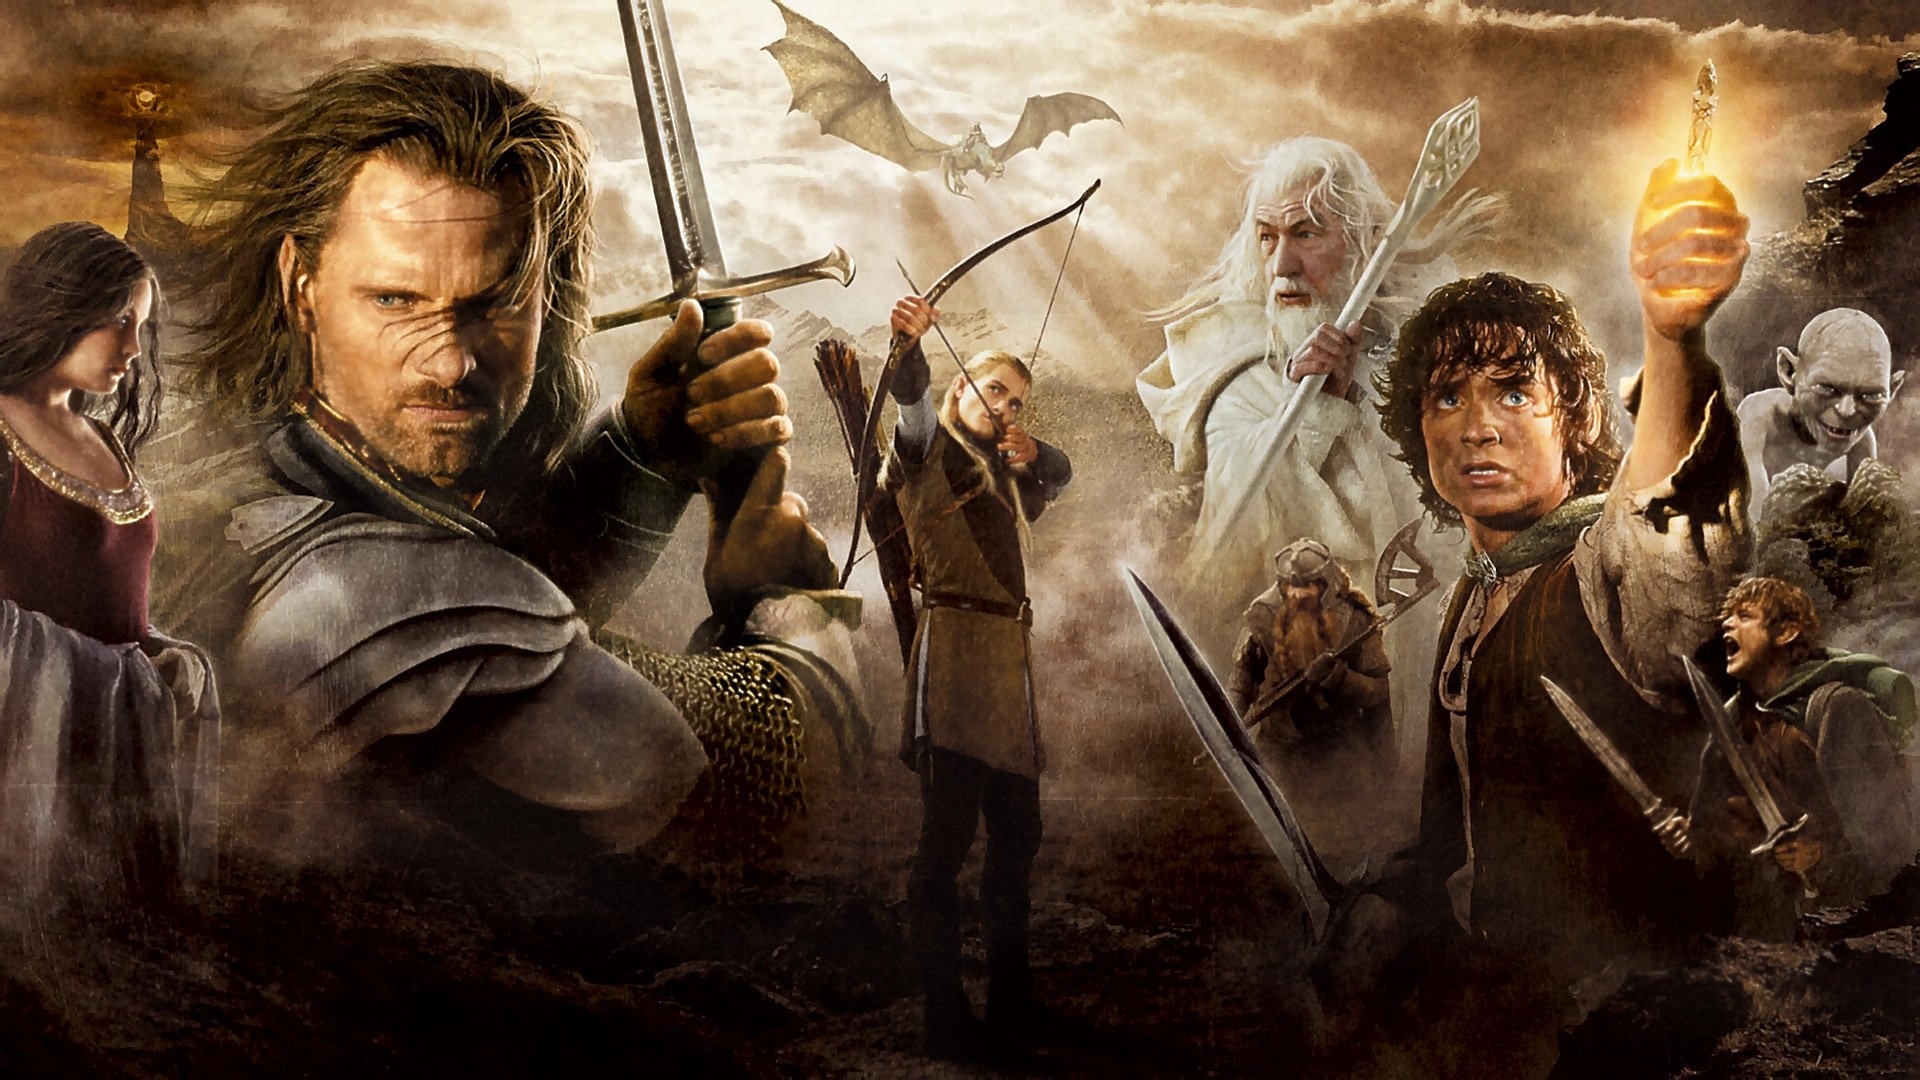 Sam, The Lord of the Rings film, Iconic characters, Epic wallpapers, 1920x1080 Full HD Desktop